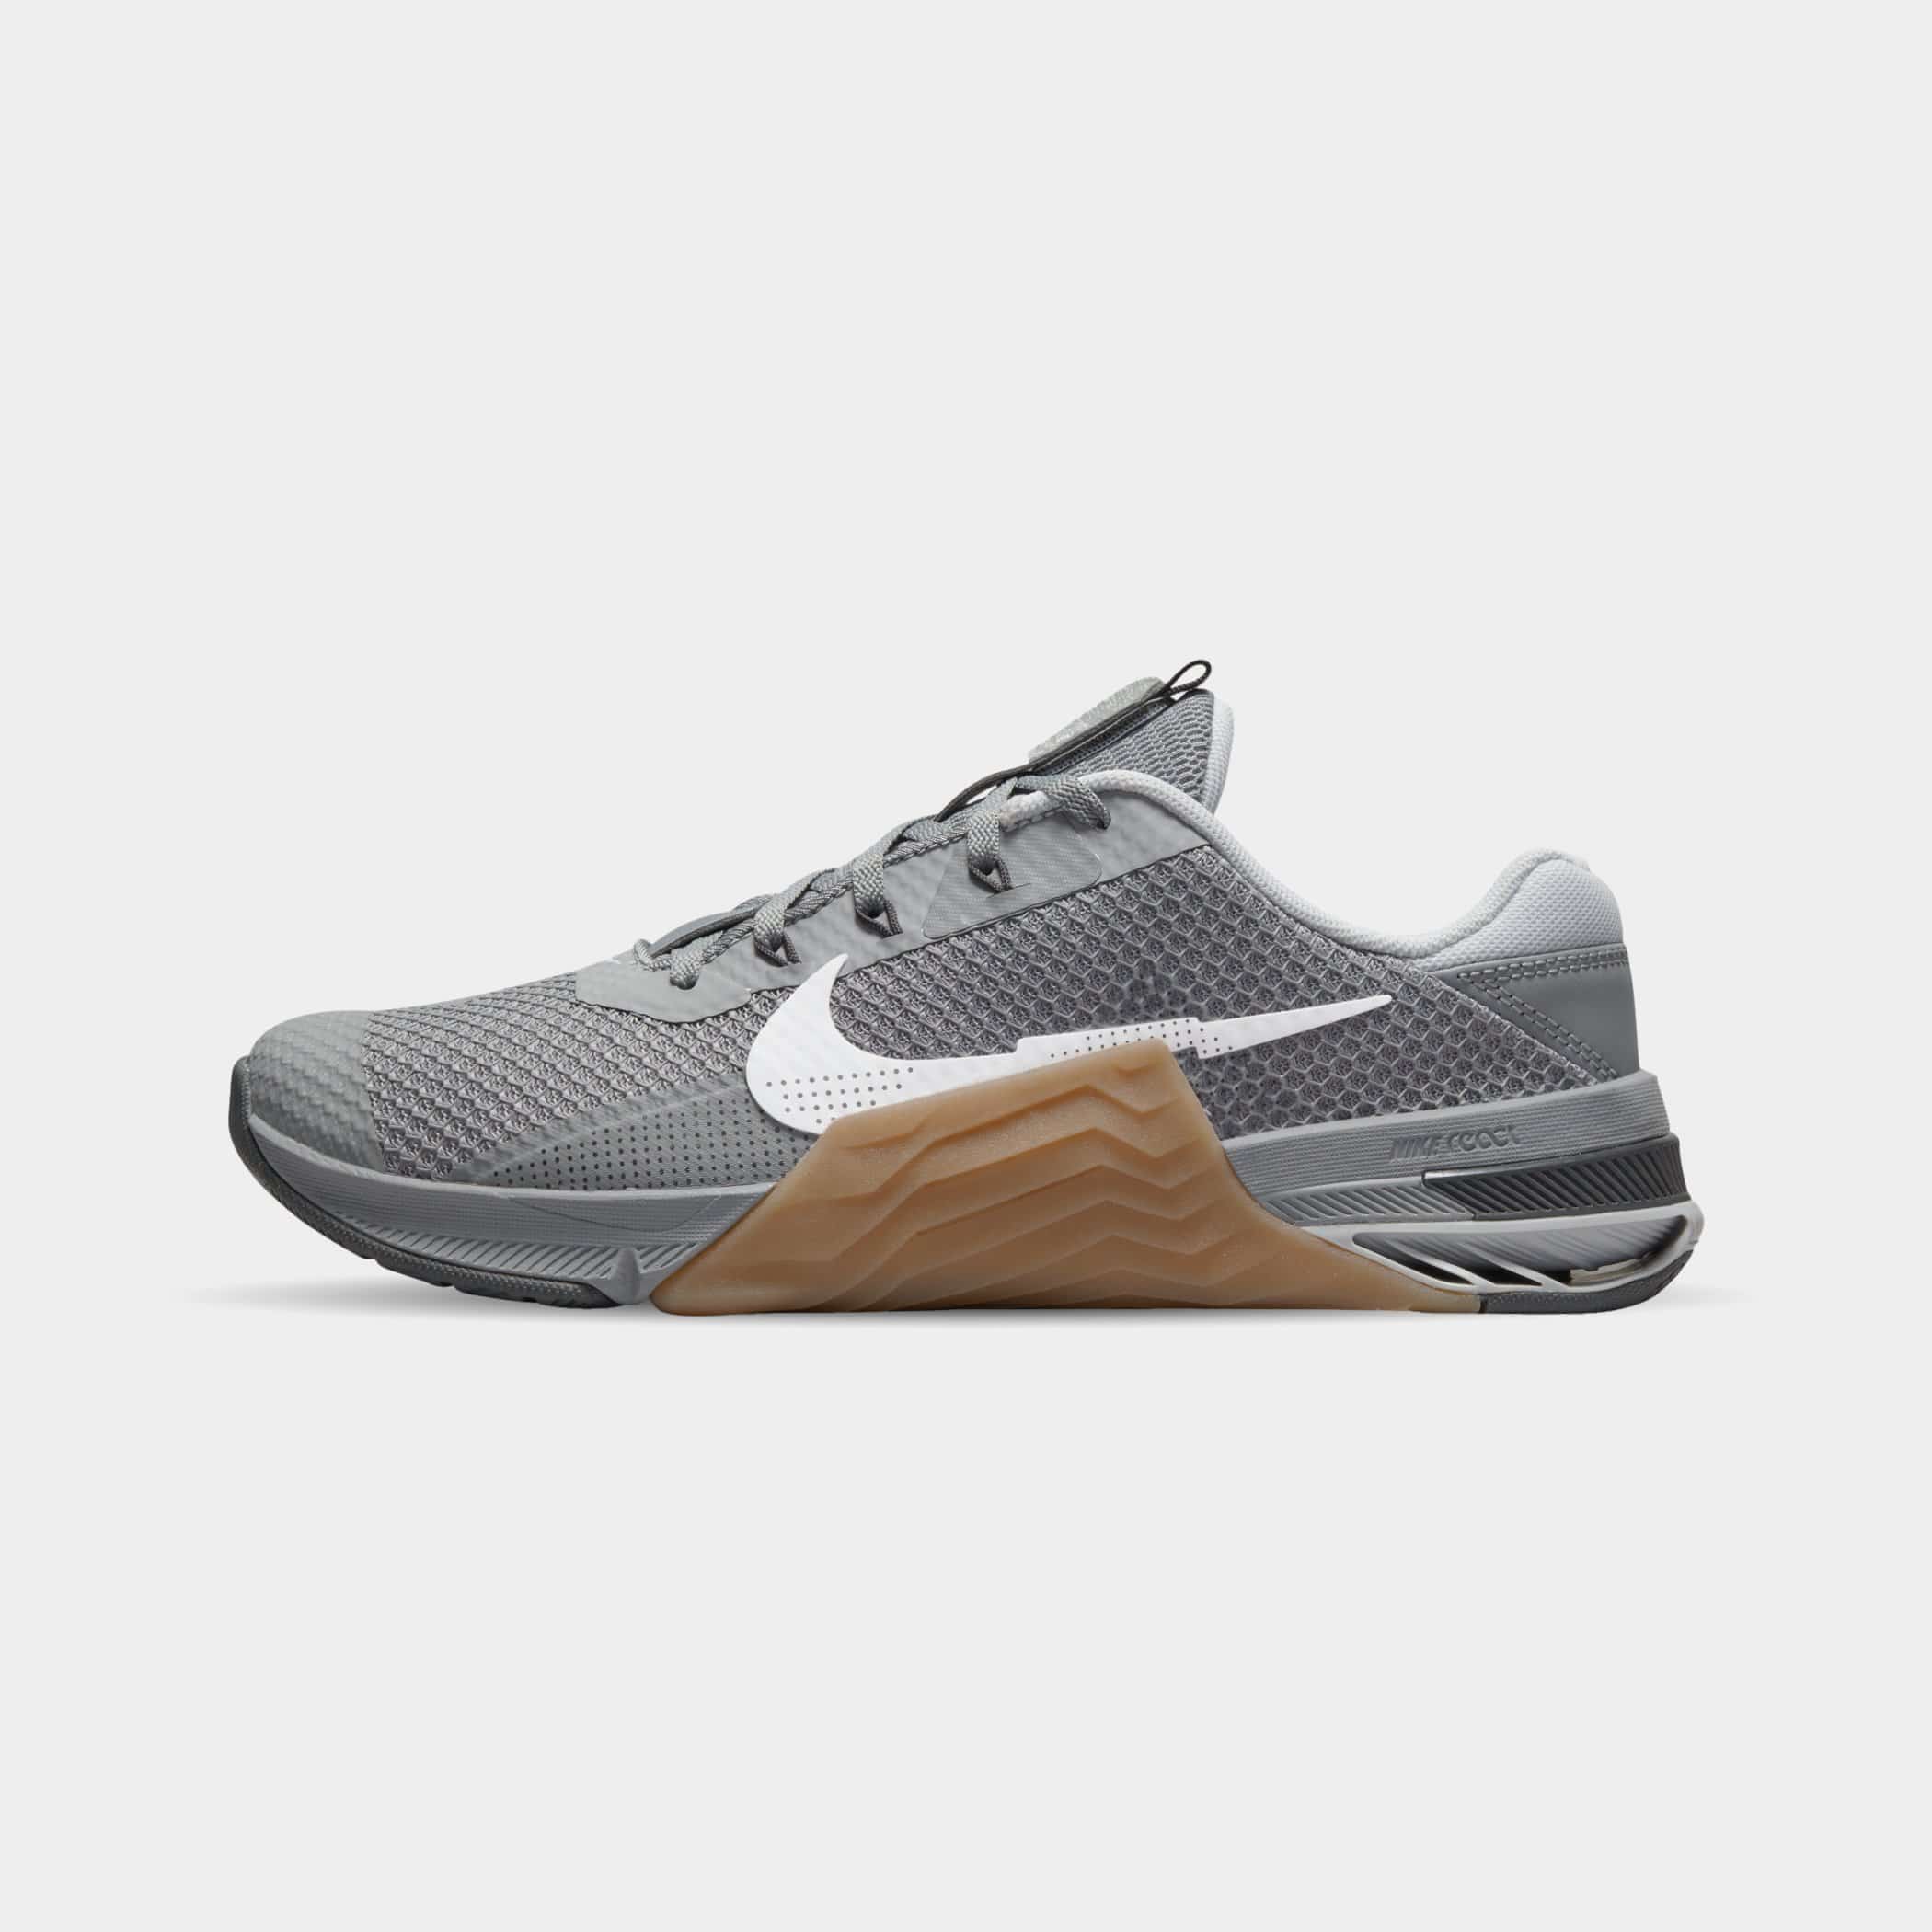 Excluir canal farmacéutico Nike Metcon 7 Men's Training Shoes in Grey - WIT Fitness